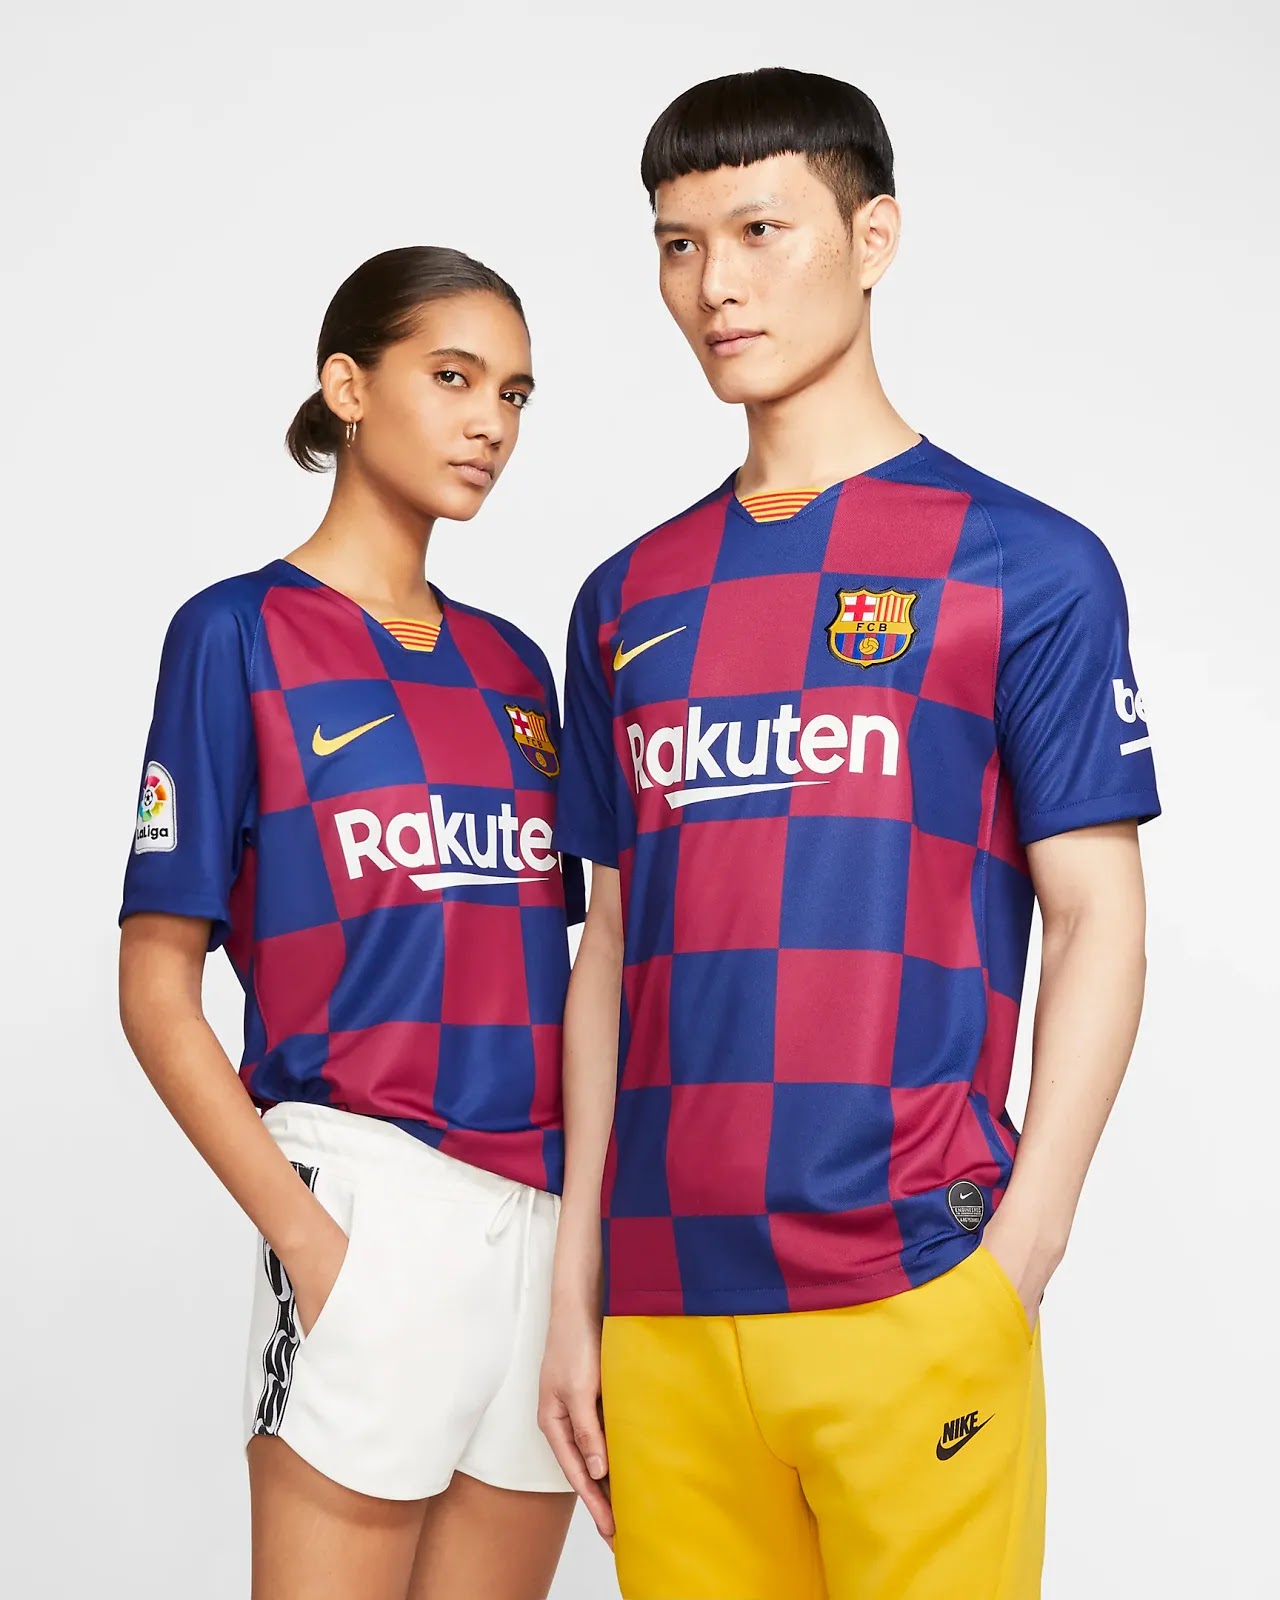 difference between men's and women's football jerseys